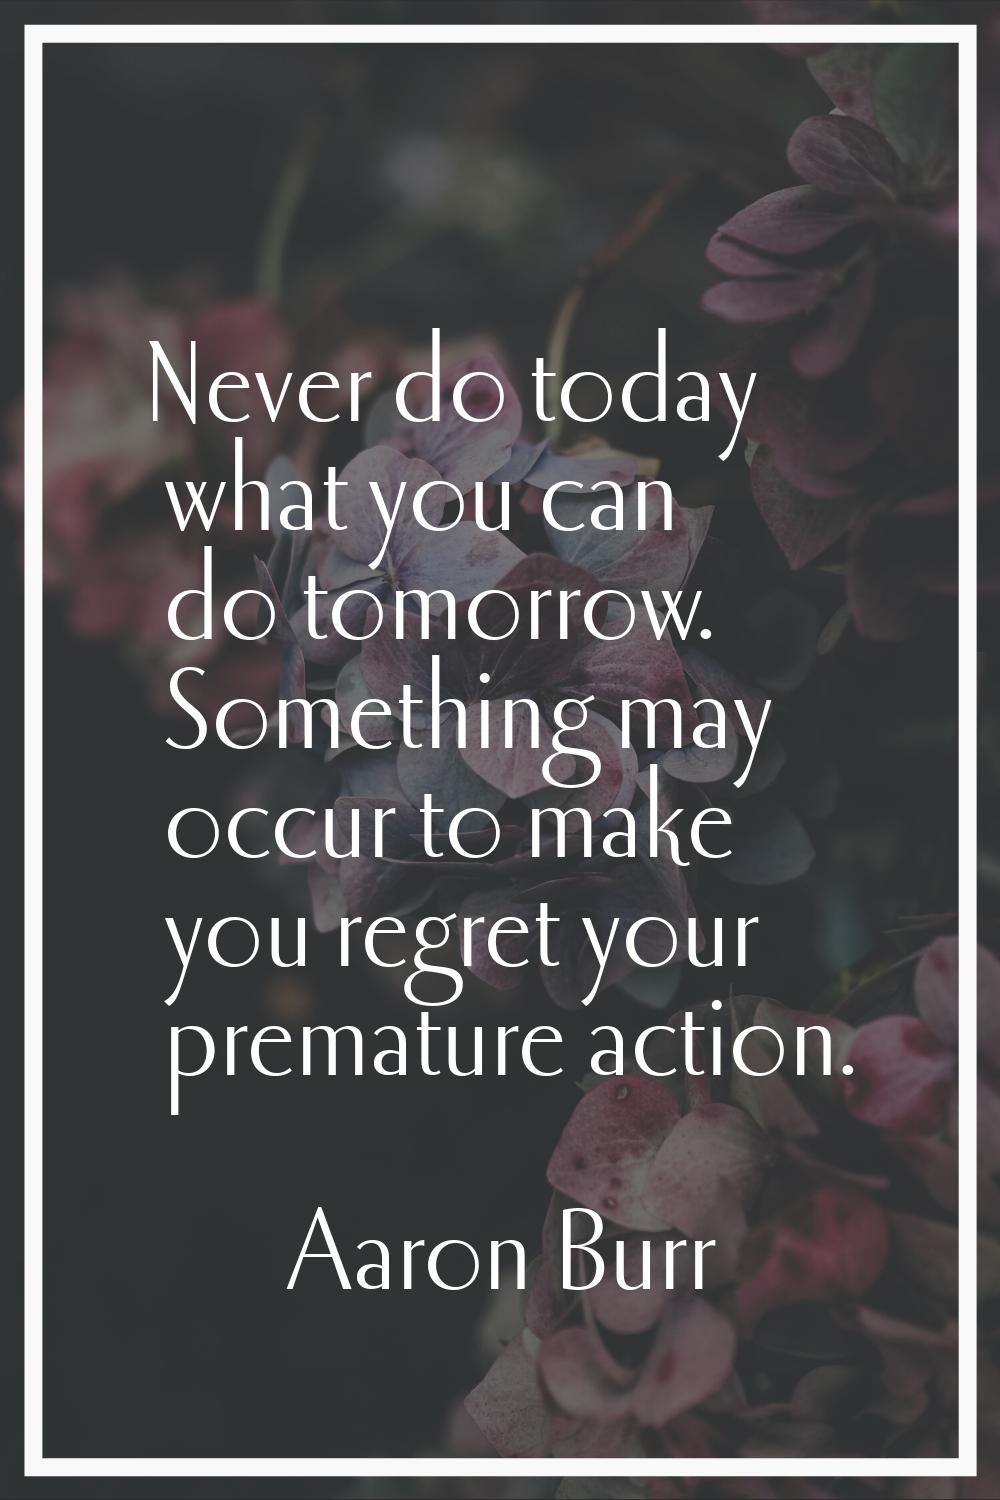 Never do today what you can do tomorrow. Something may occur to make you regret your premature acti